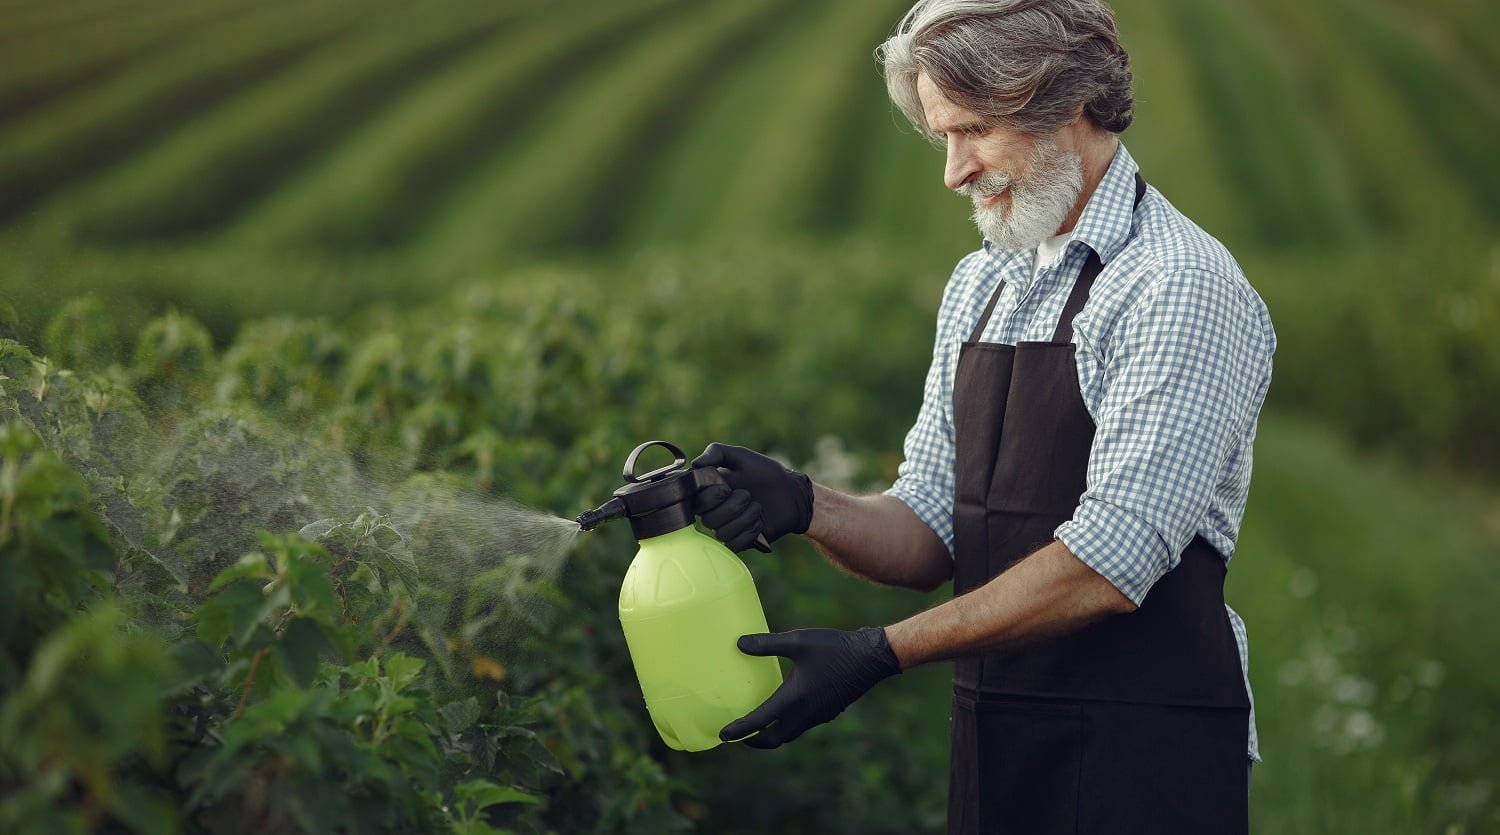 Farmer spraying vegetables in the garden with herbicides. Man in a black apron.